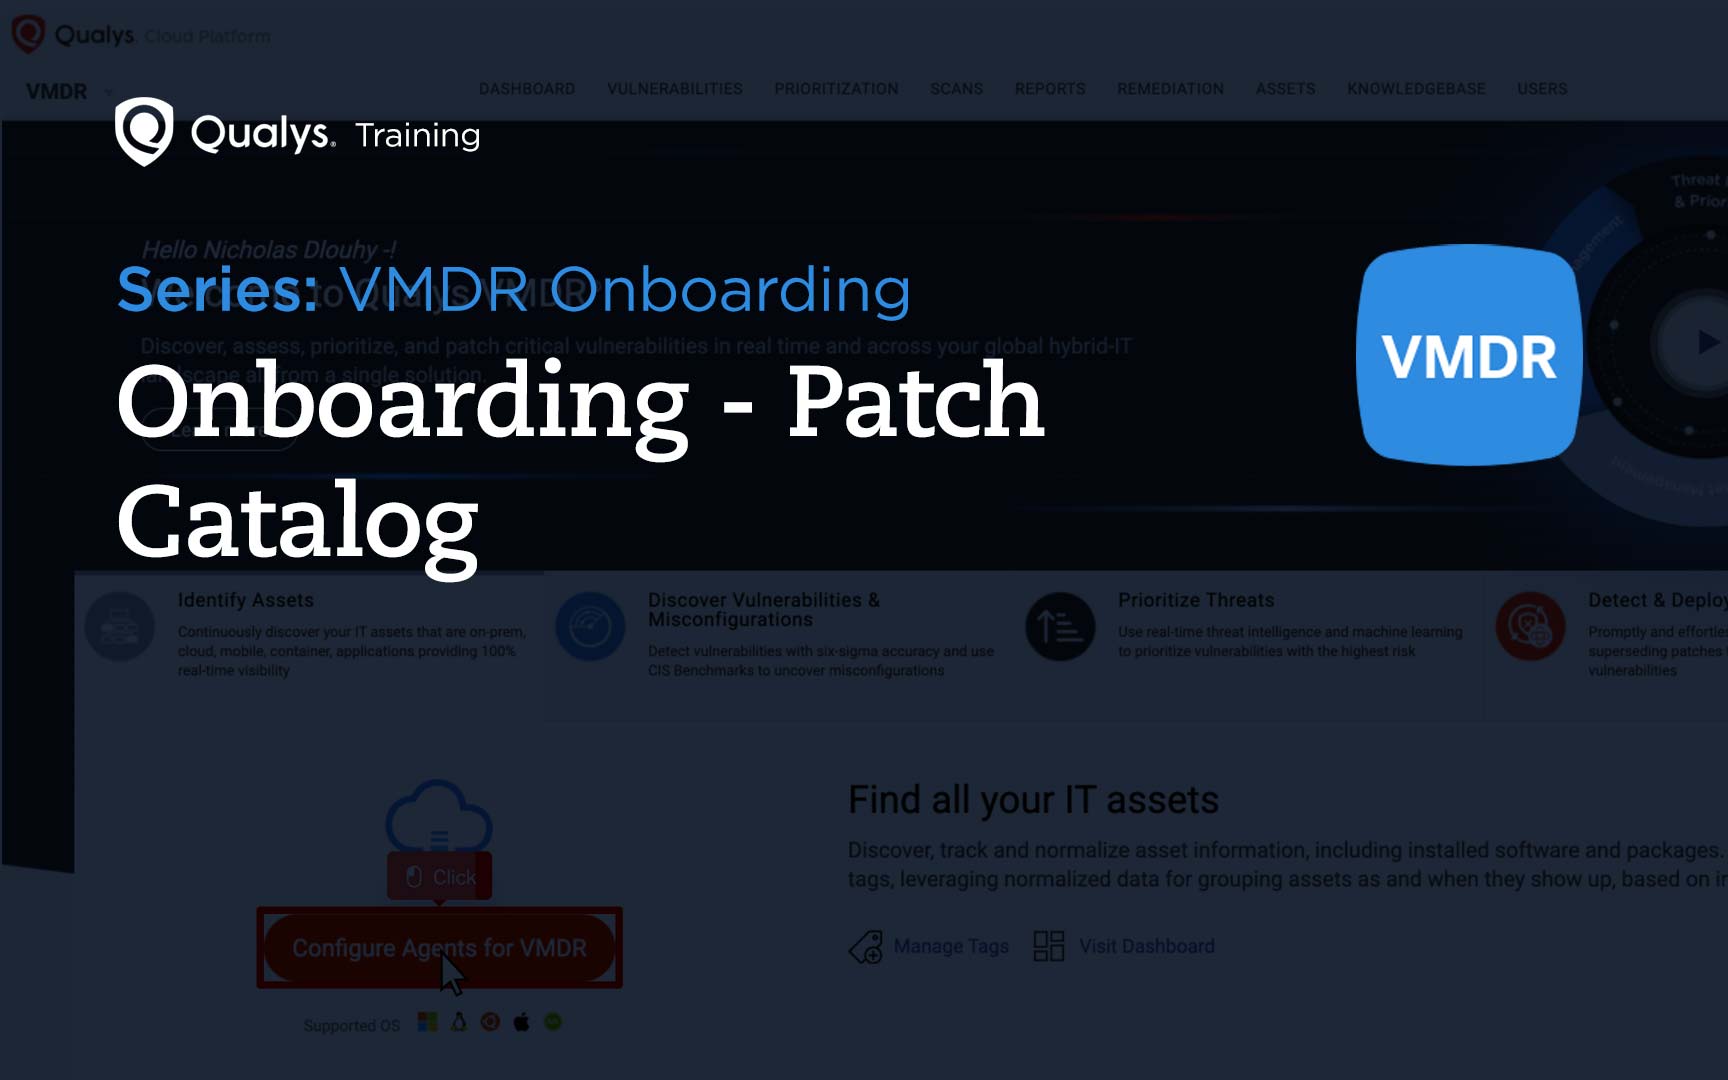 Onboarding - Patch Catalog